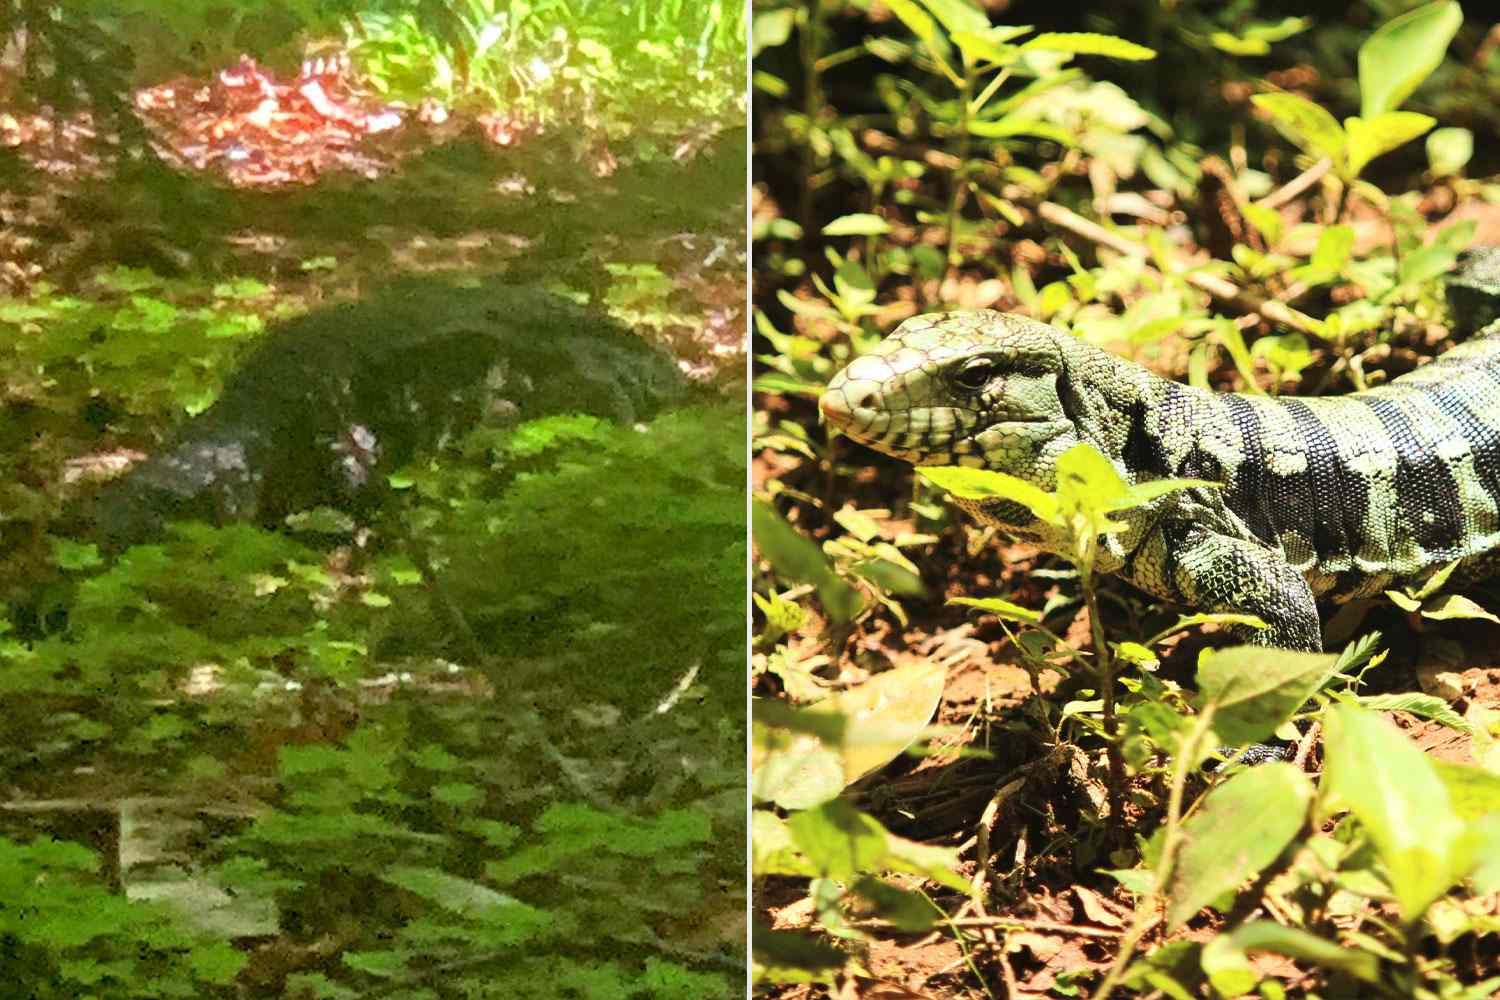 Roaming 'Alligator' Who Sparked Fears in Washington State Turns Out to Be a Large Pet Lizard